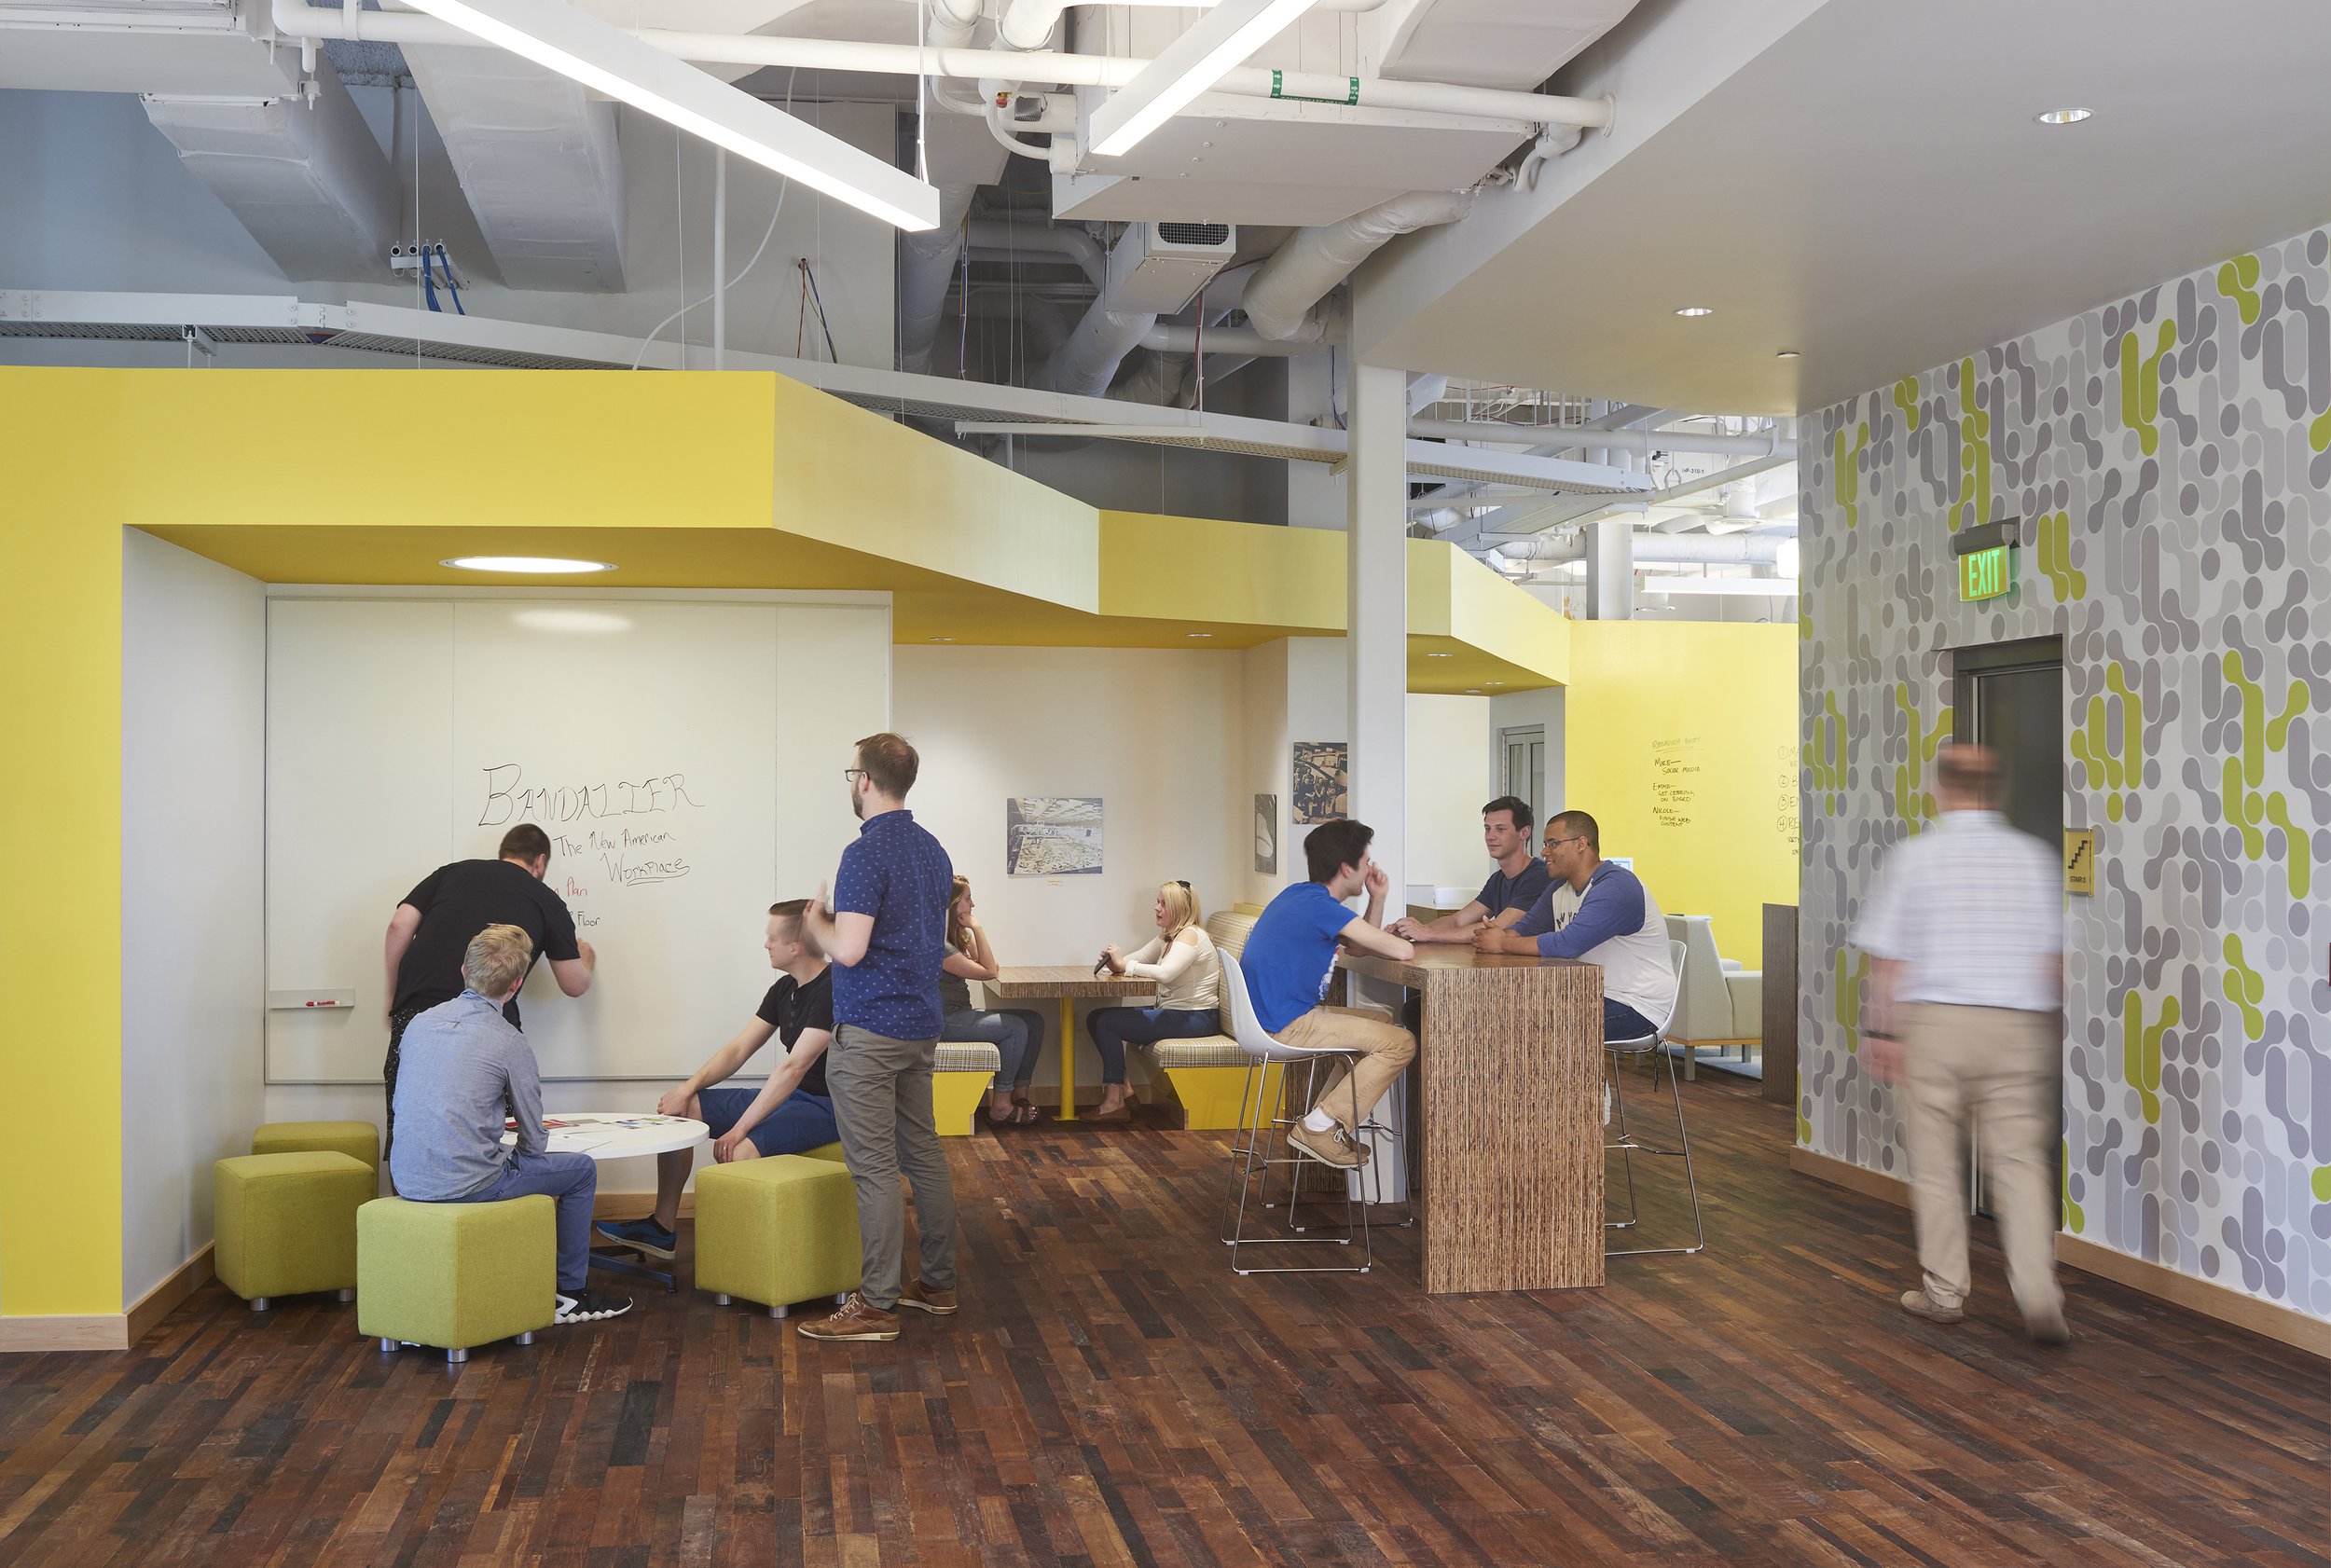 KOFFMAN SOUTHERN TIER INCUBATOR&lt;strong&gt;Spaces throughout the building are designed to instigate interaction between startups.&lt;/strong&gt;